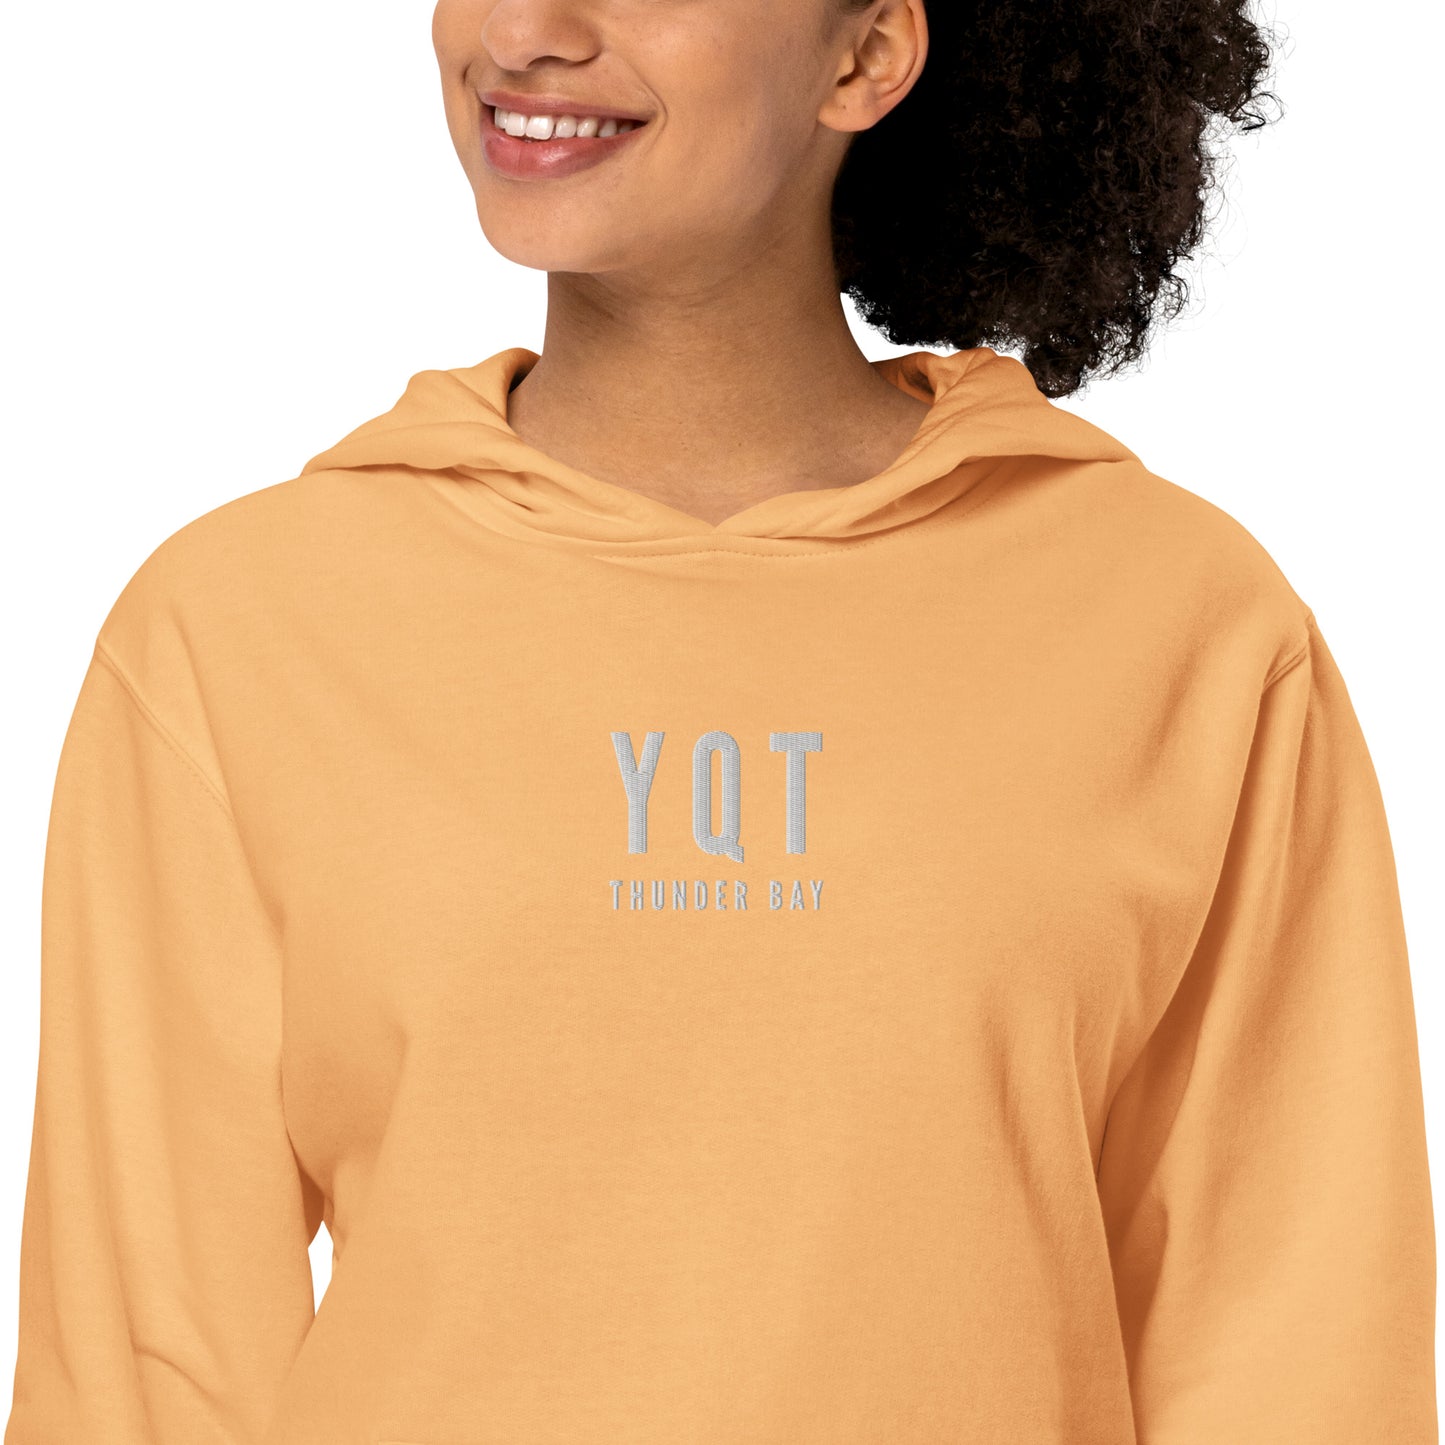 City Midweight Hoodie - White • YQT Thunder Bay • YHM Designs - Image 05